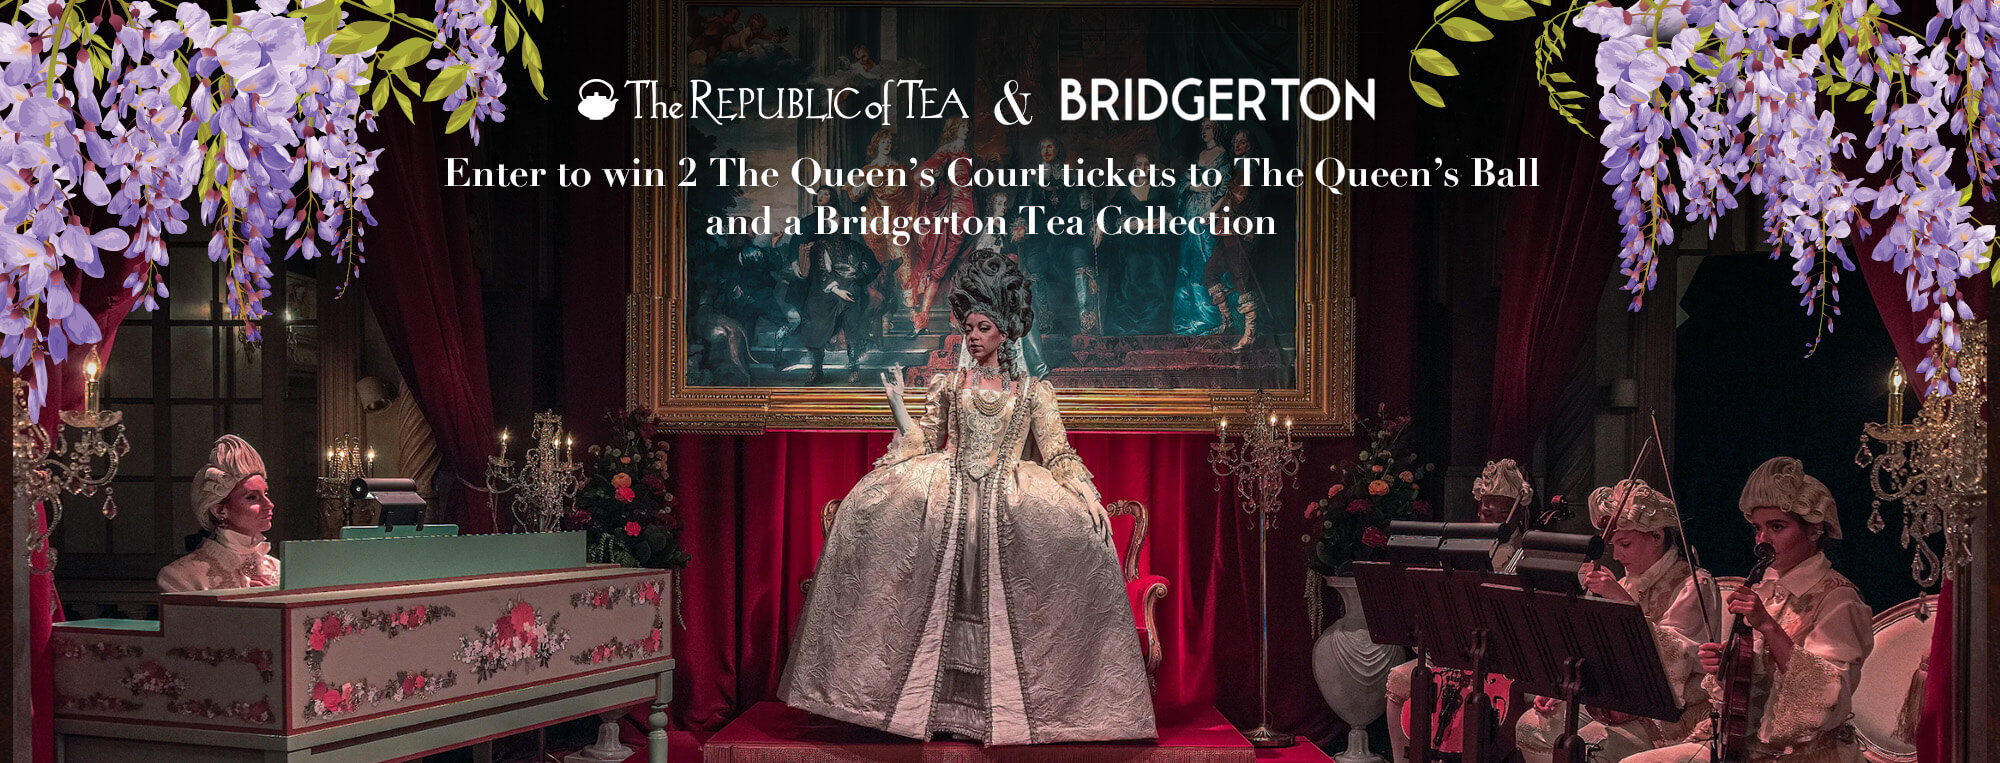 <p>Enter for a chance to win (2) VIP tickets to<br />
The Queen’s Ball: A Bridgerton Experience and a<br />
collection of exclusive Bridgerton Teas.</p>
